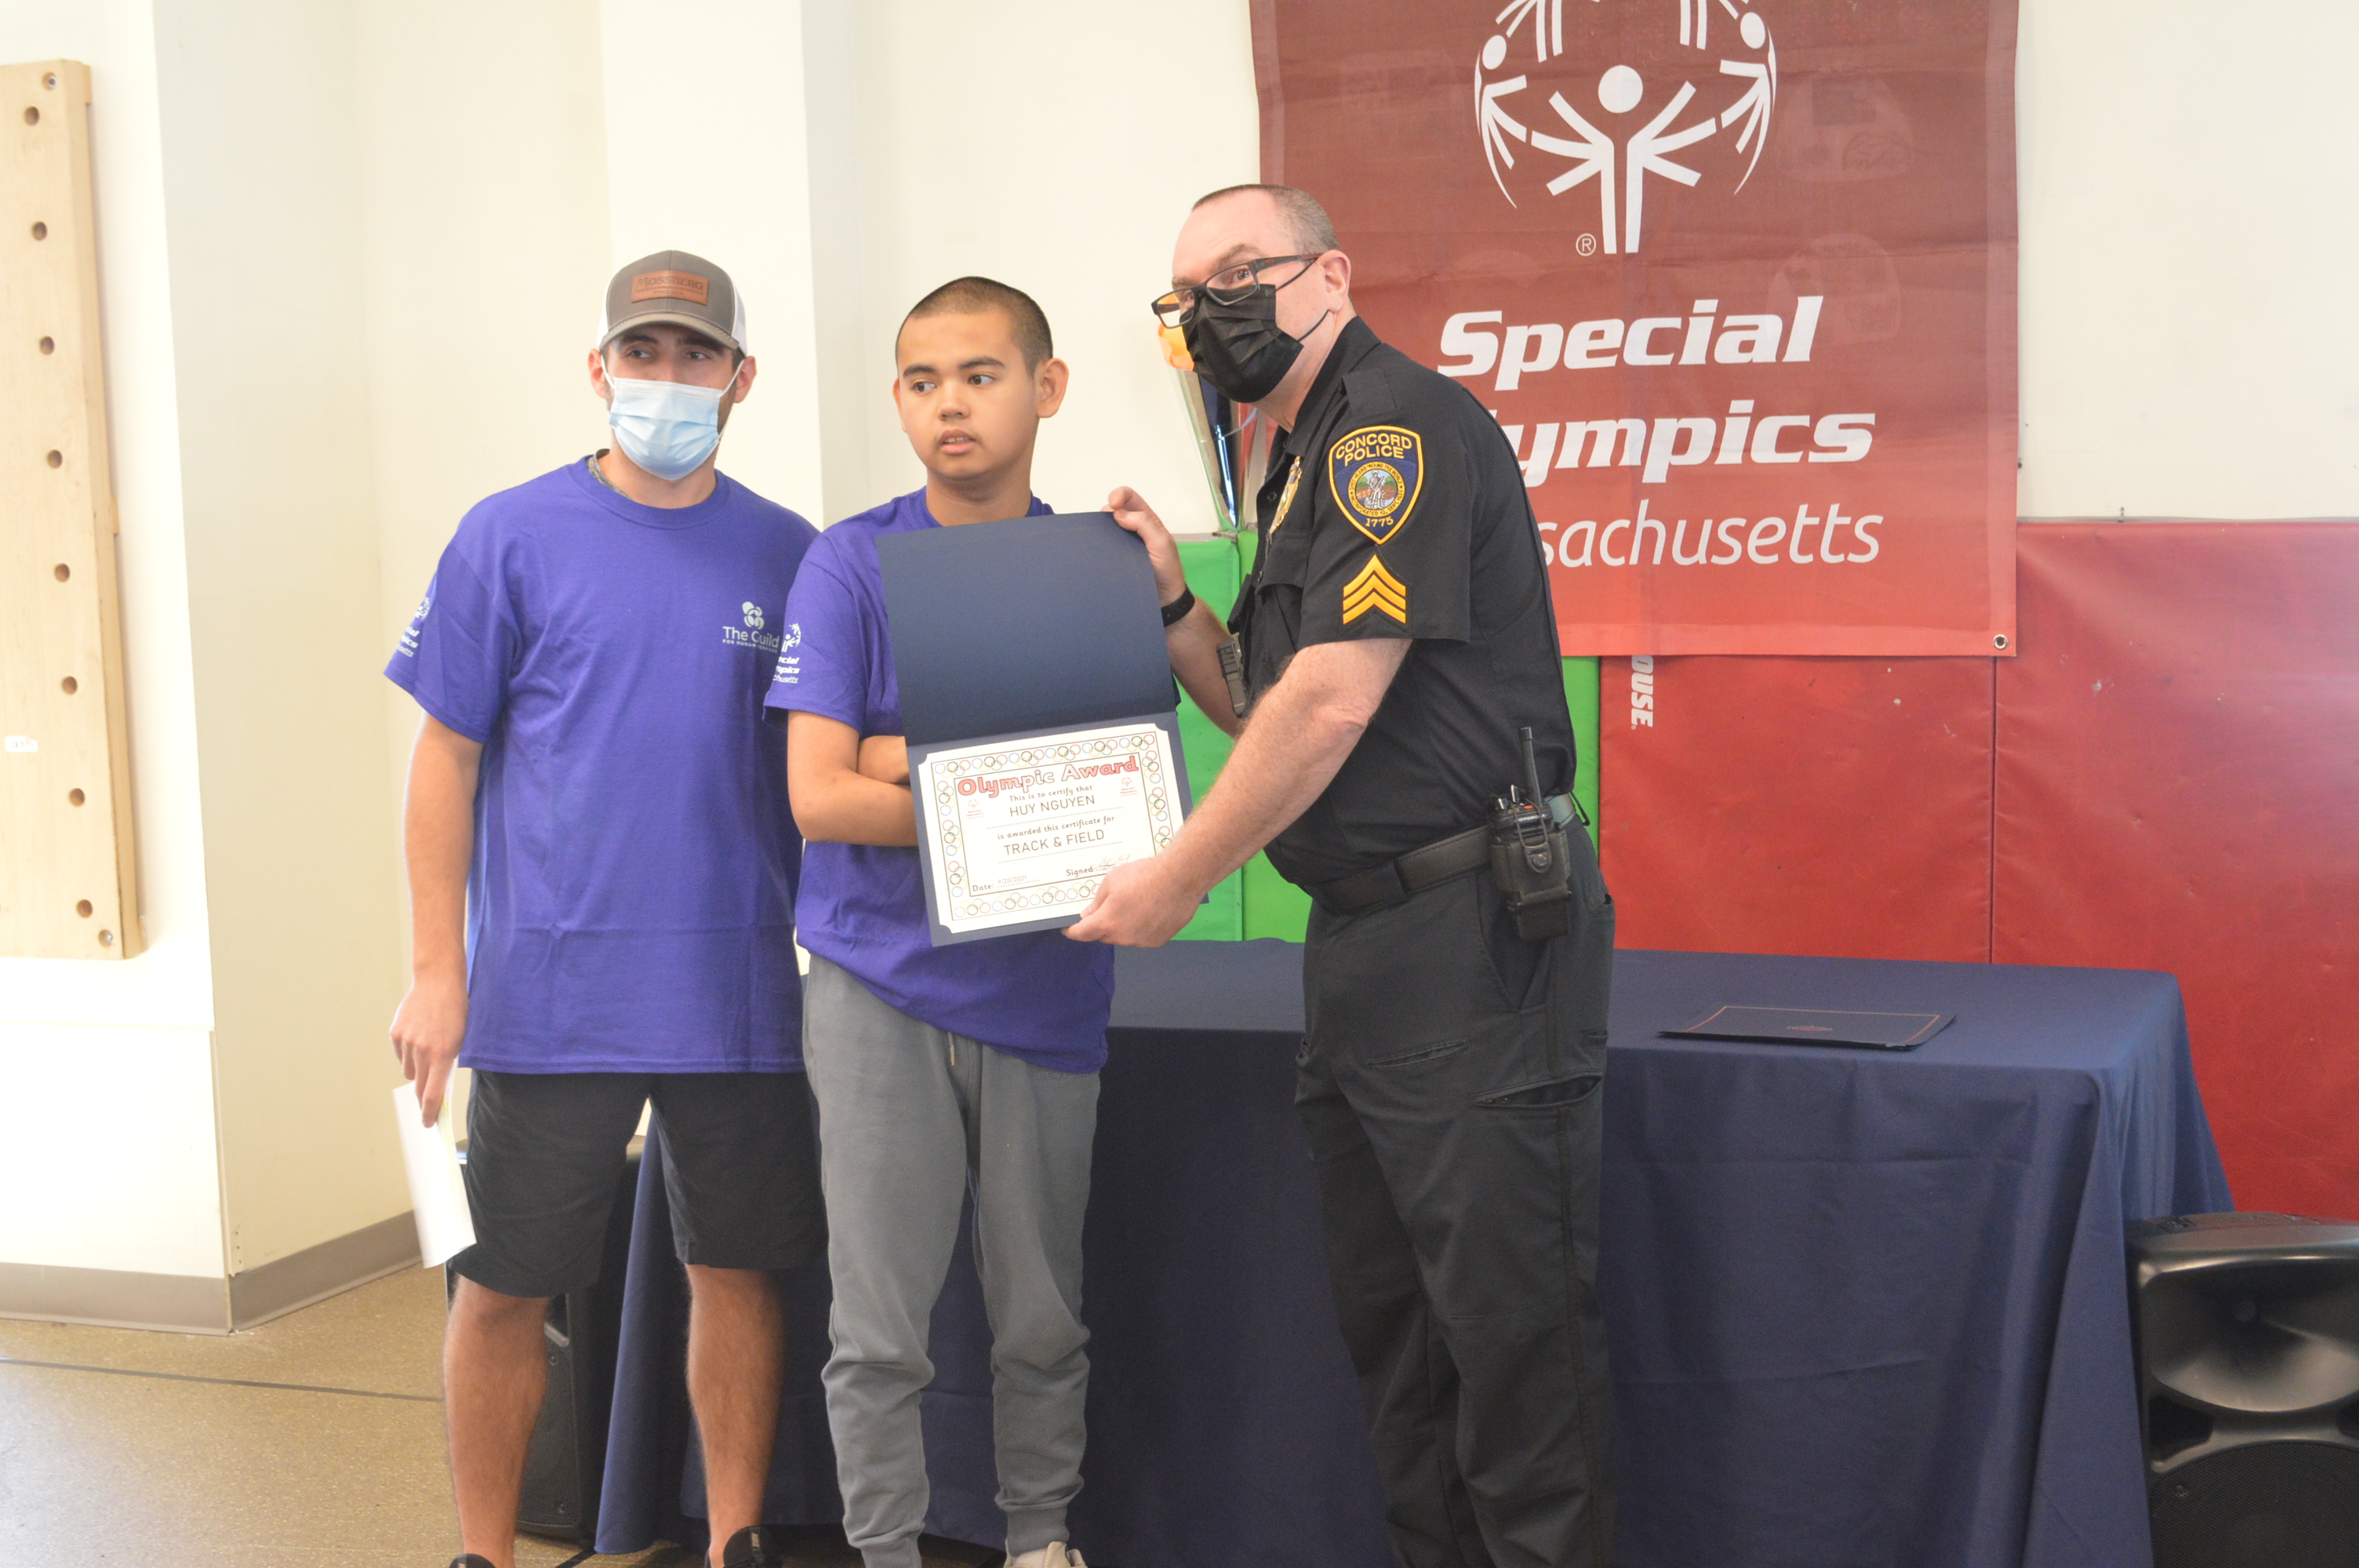 Thomas Lucia, Guild for Human Services with Guild School student Huy Nguyen and Concord Police Sergeant Tim Landers